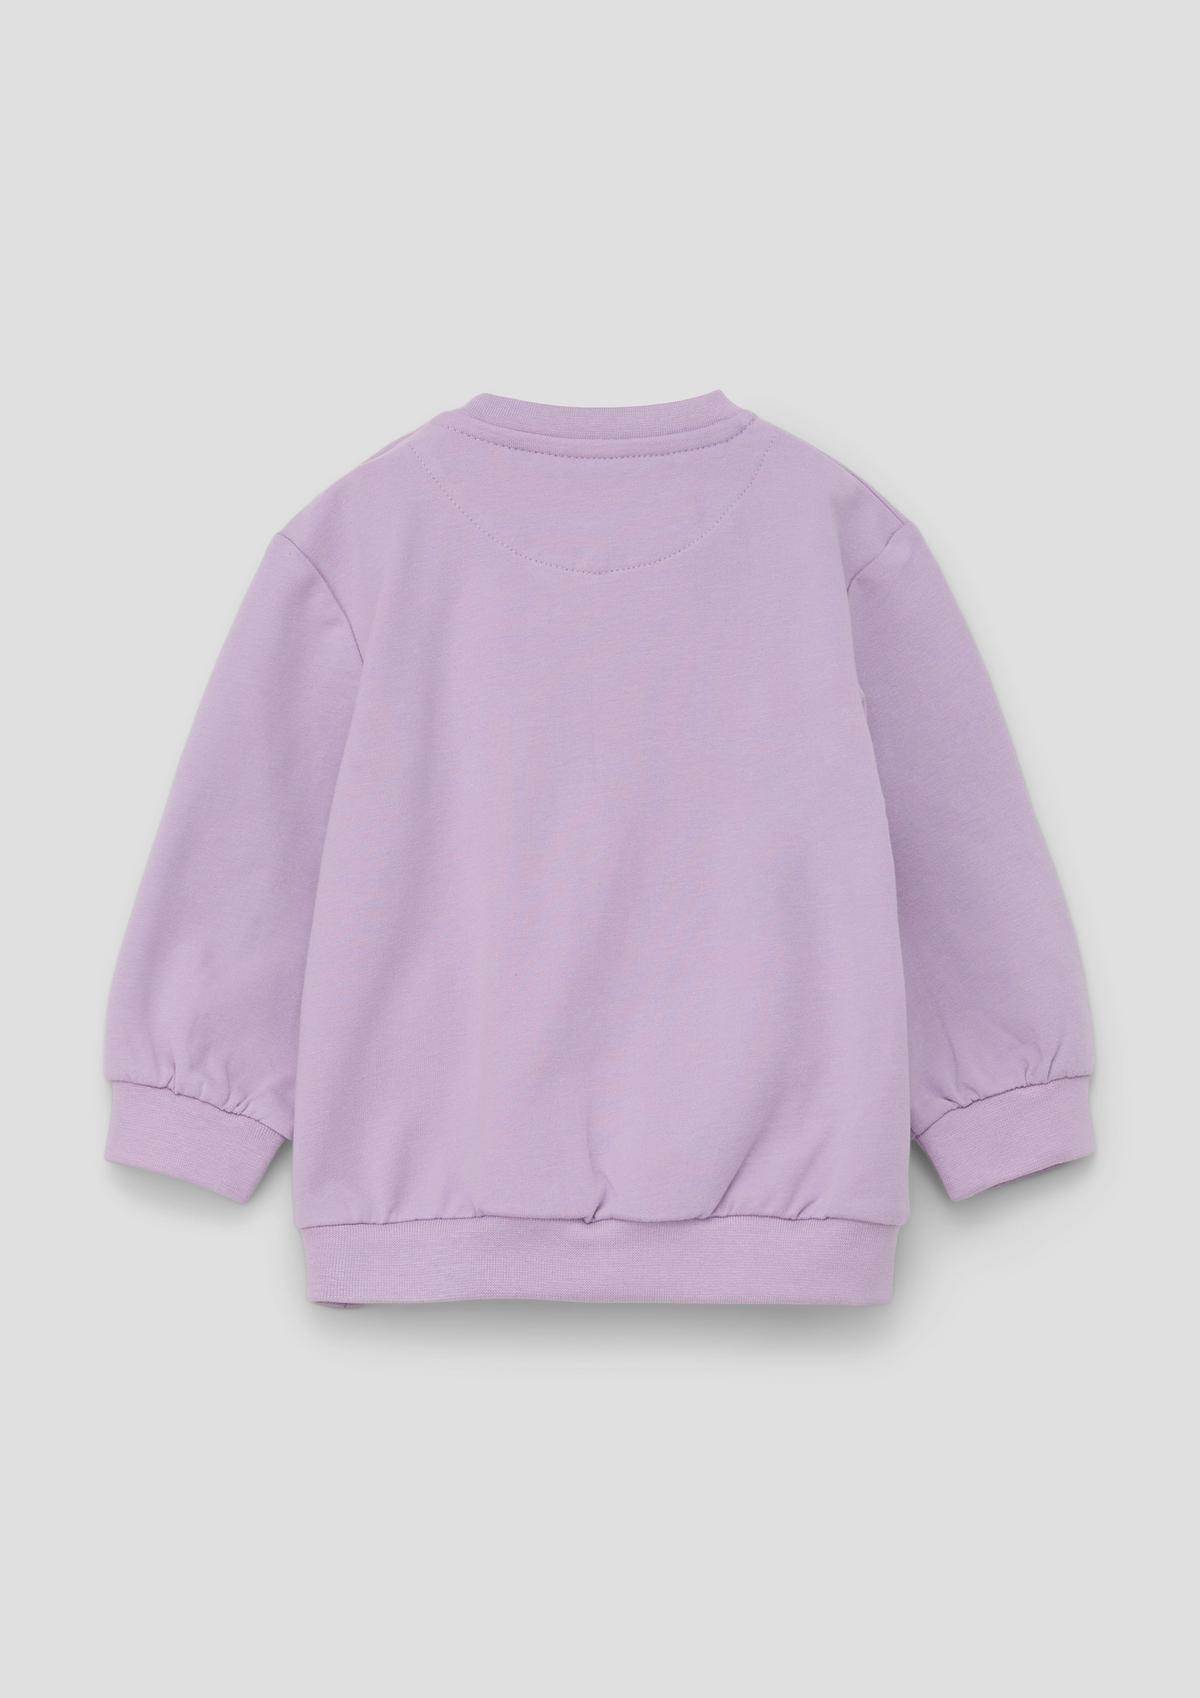 s.Oliver Sweatshirt with a glittery print